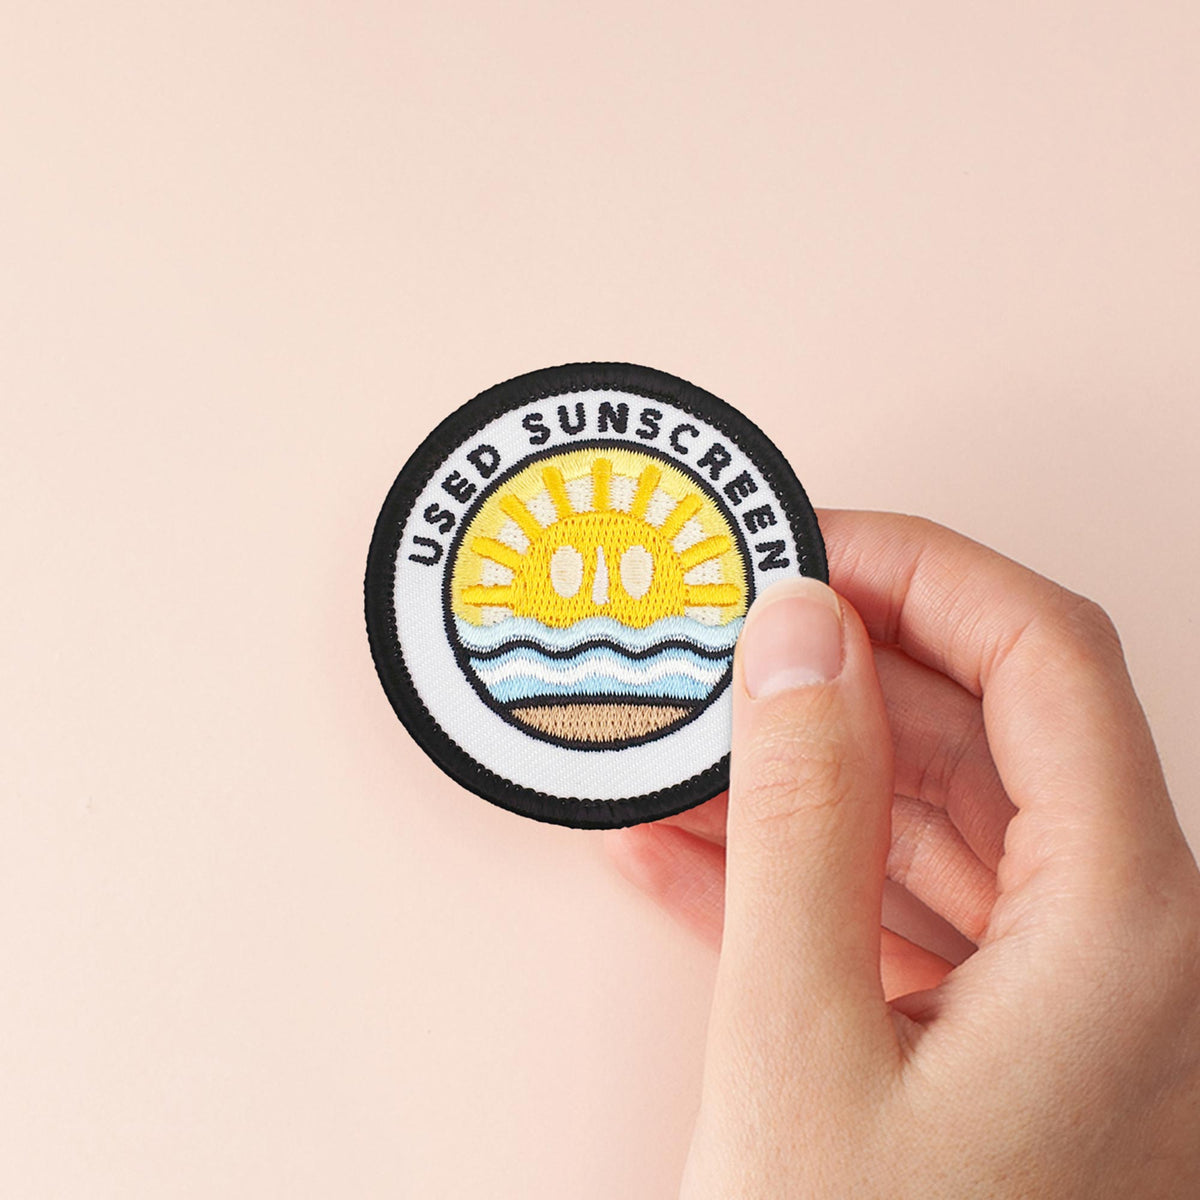 Used Sunscreen individual adulting merit badge patch for adults